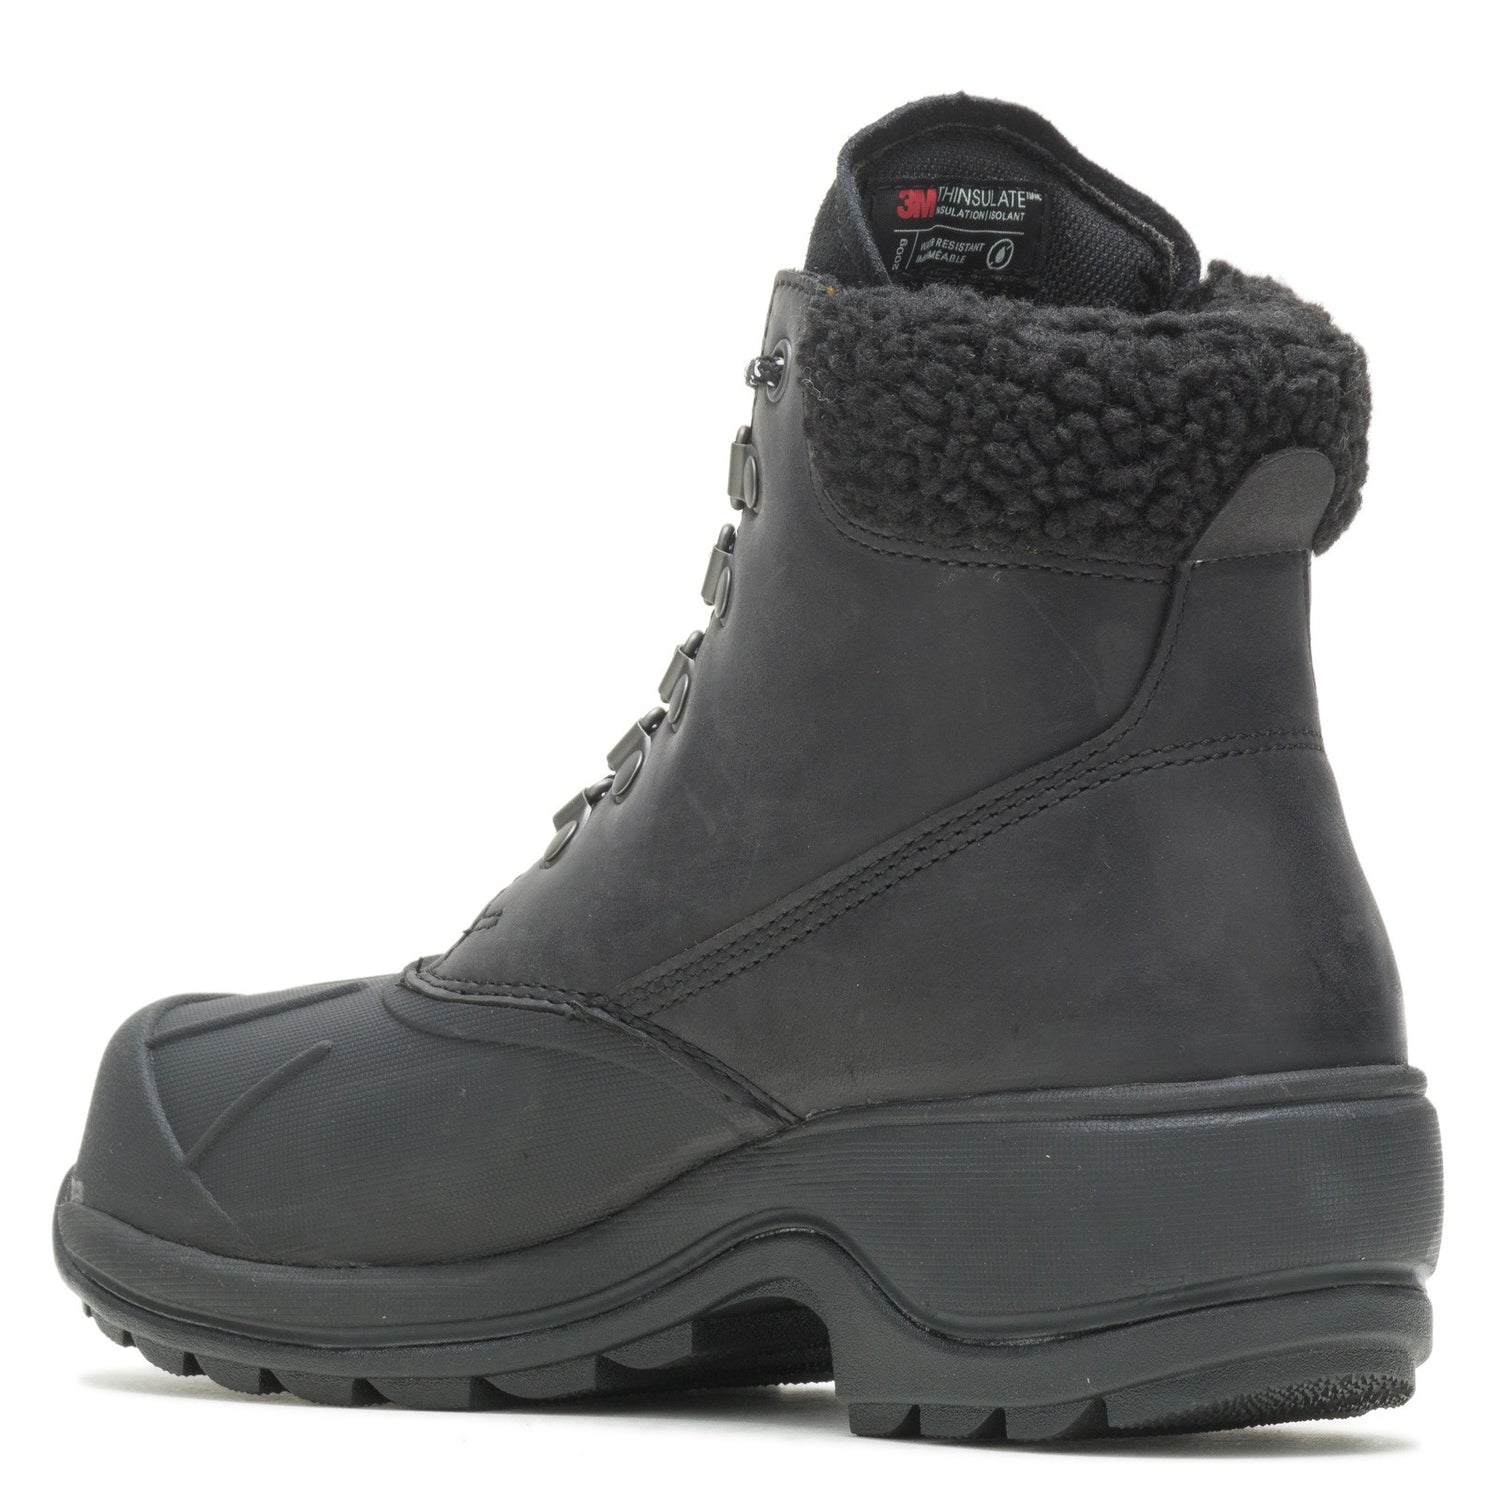 Peltz Shoes  Women's Wolverine Frost Insulated Boot SOLID BLACK W880210